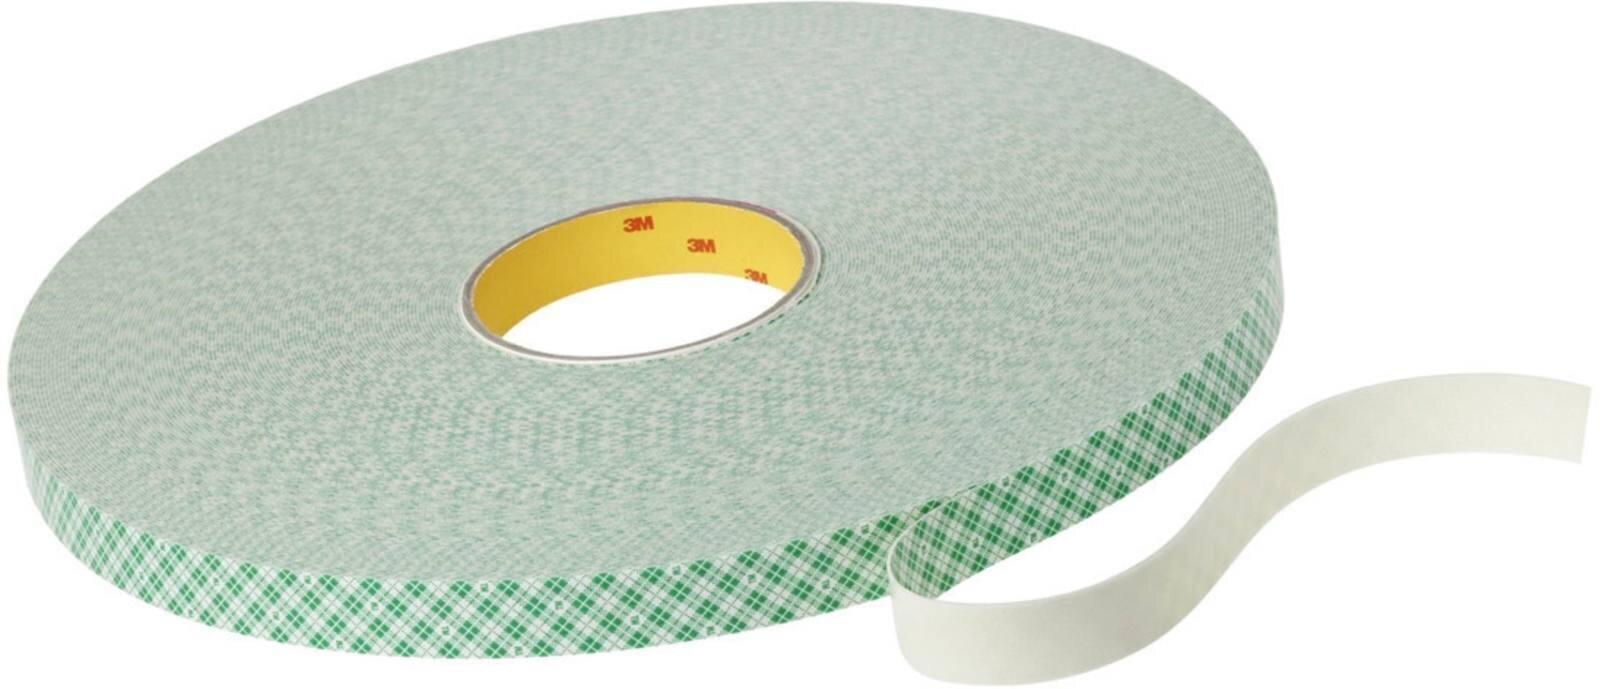 3M PU foam adhesive tape with acrylic adhesive 4032, beige, 12 mm x 66 m, 0.8 mm